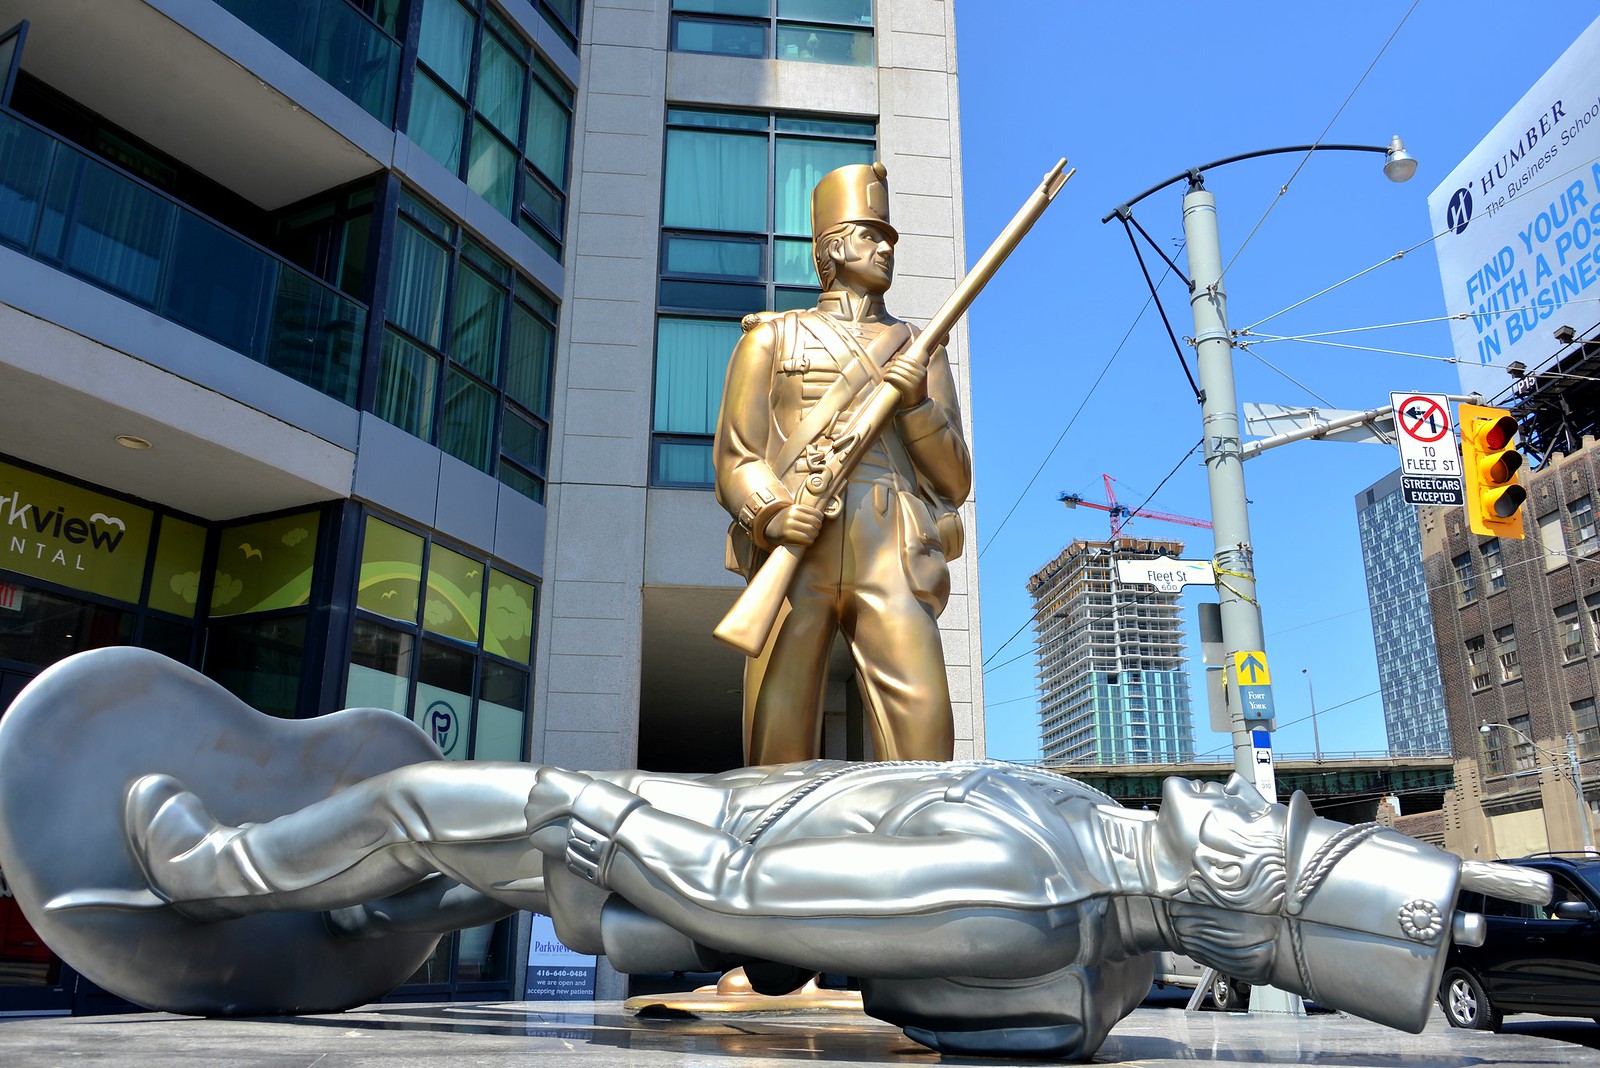 Toy Soldiers in Toronto